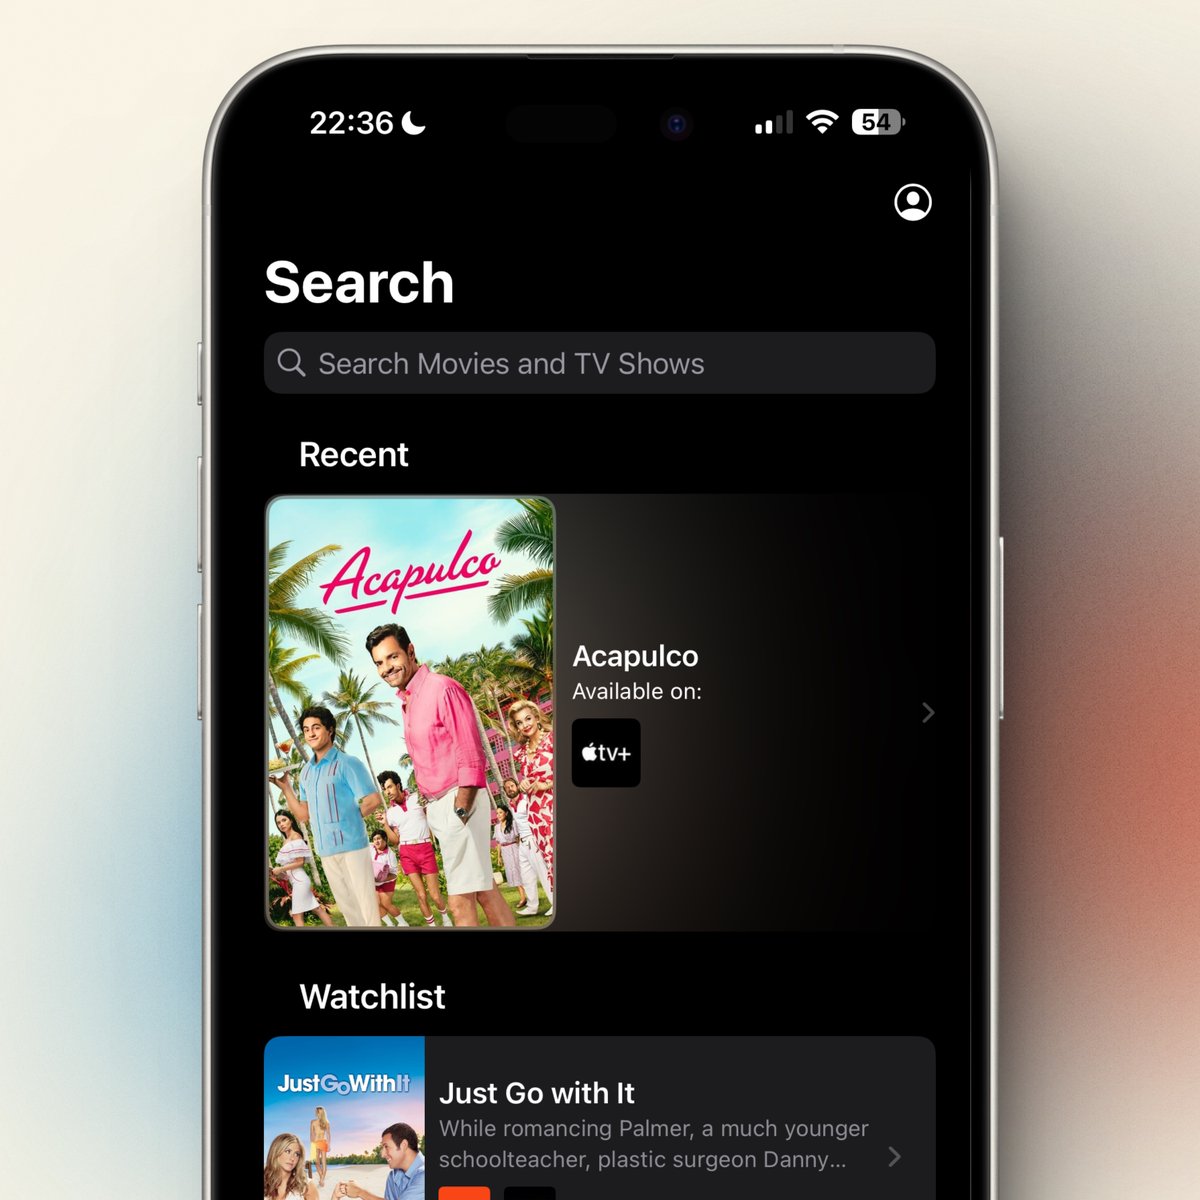 I am building a simple app that lets you effortlessly find where to stream movies or series.

There are no distractions, no personalized recommendations, no ads, just a search bar and a list.

Who wants to give it a go?
#buildinpublic